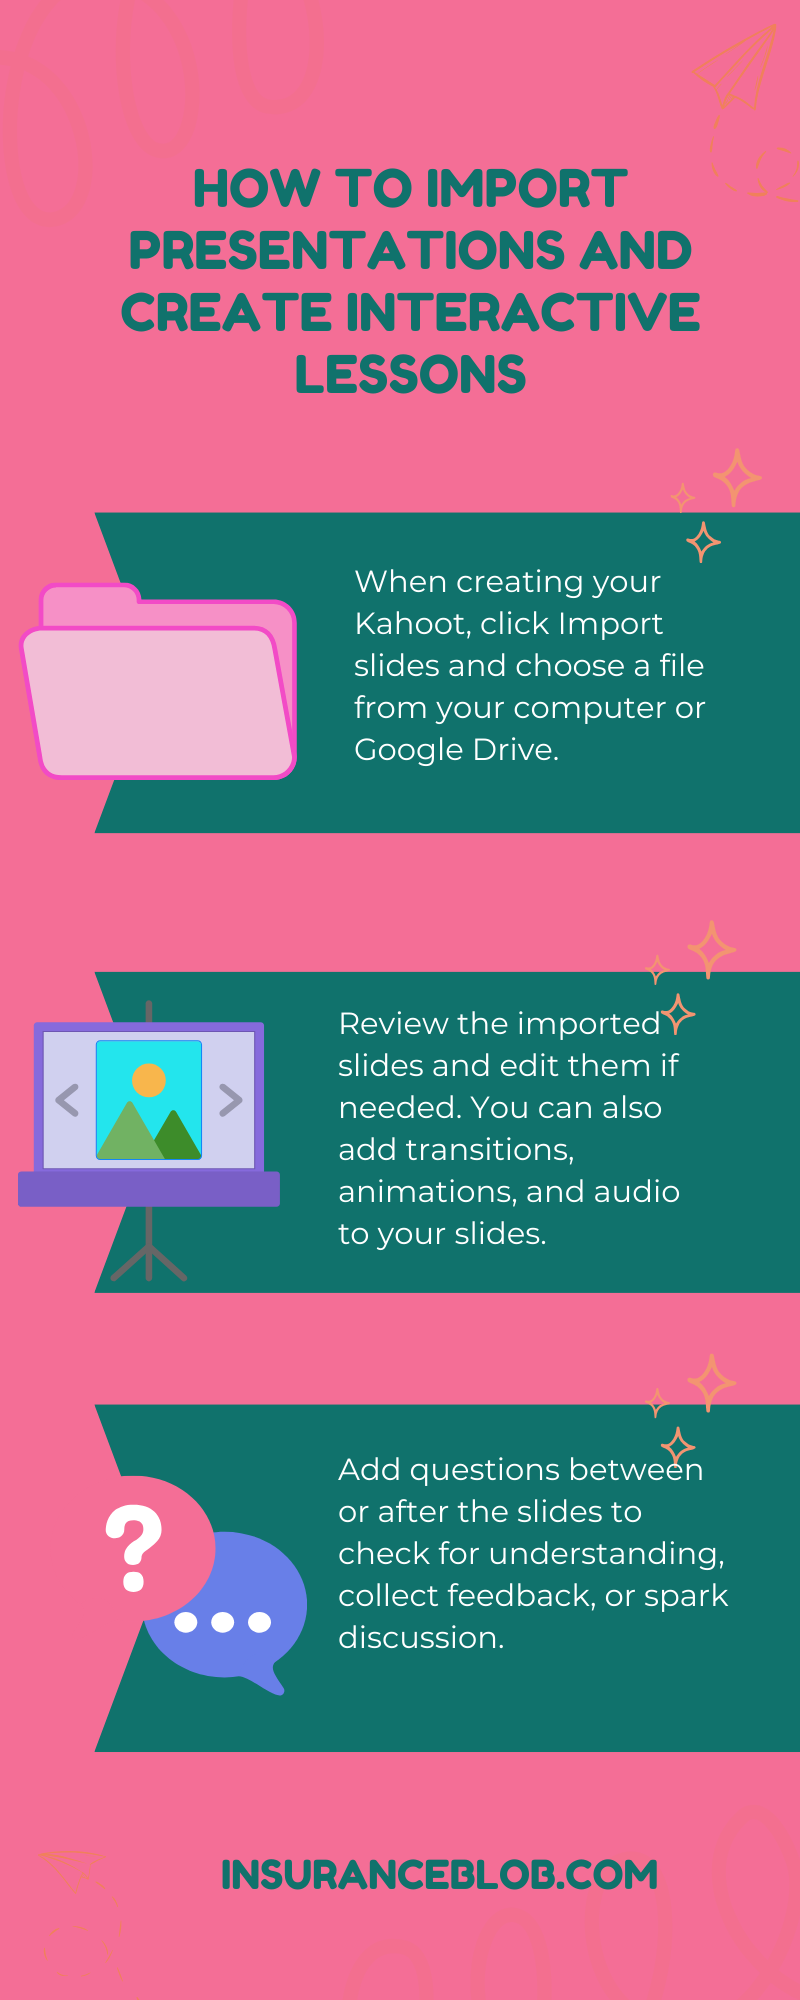 How to Import Presentations and Create Interactive Lessons